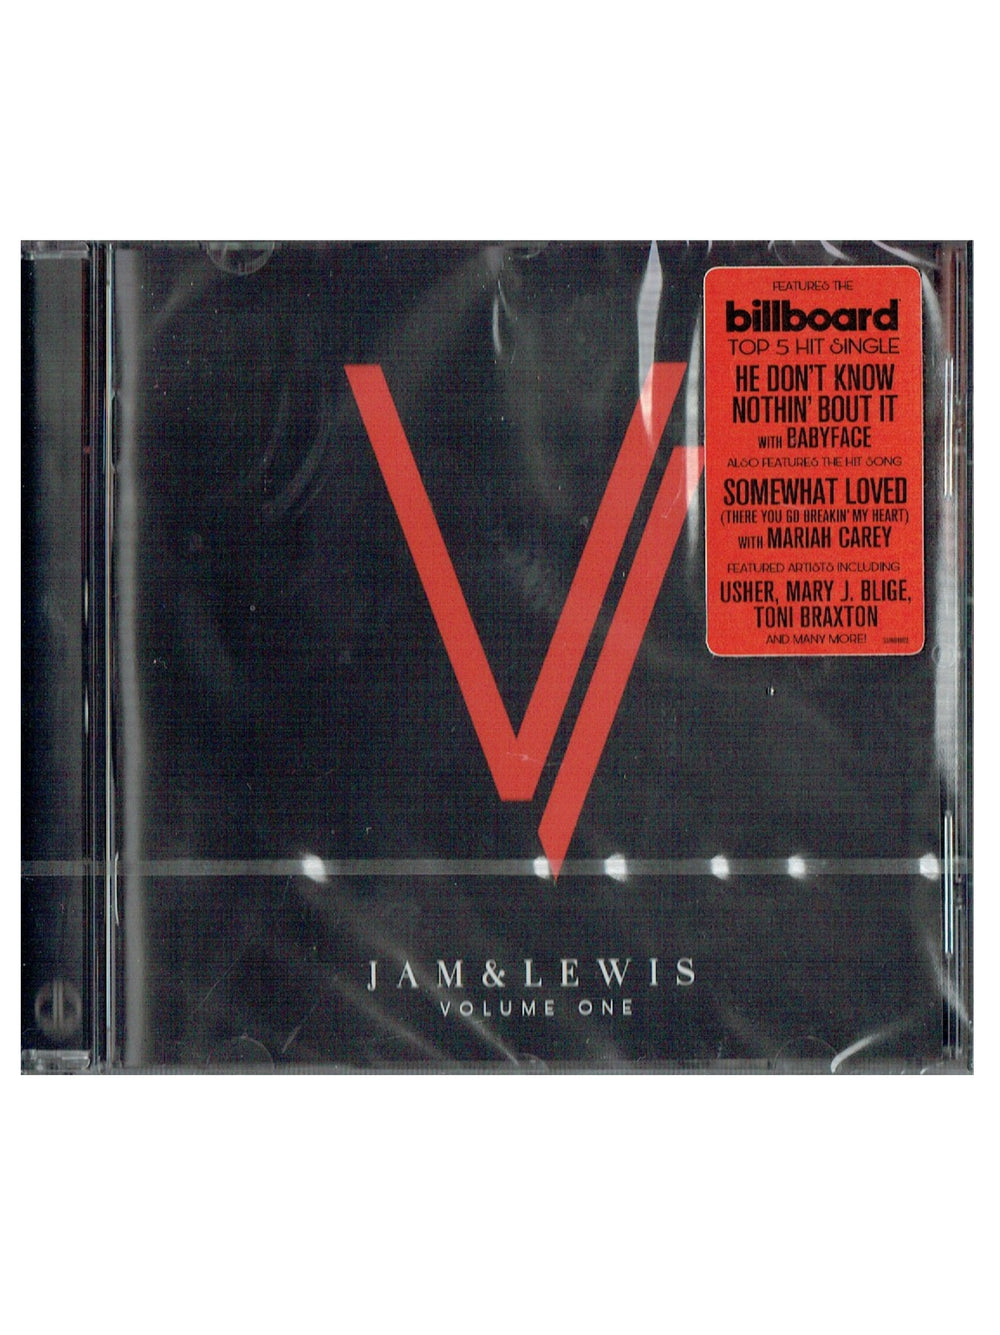 Jam & Lewis Volume One CD Album Brand New Sealed Morris Day Jerome The Roots                 (MPLS Sound /Prince)